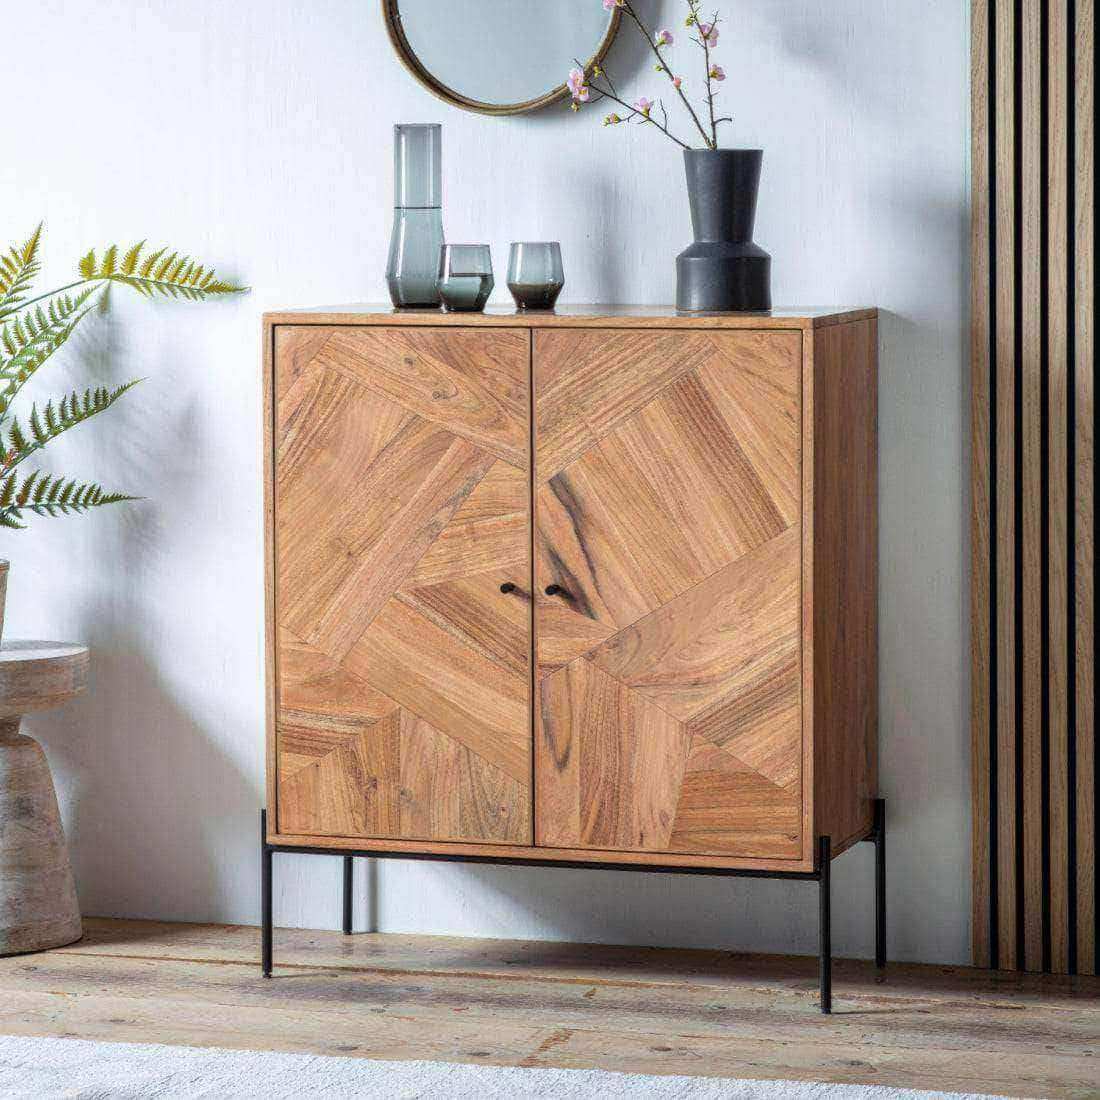 Geometric Wood Inlay Cocktail Drinks Cabinet - The Farthing